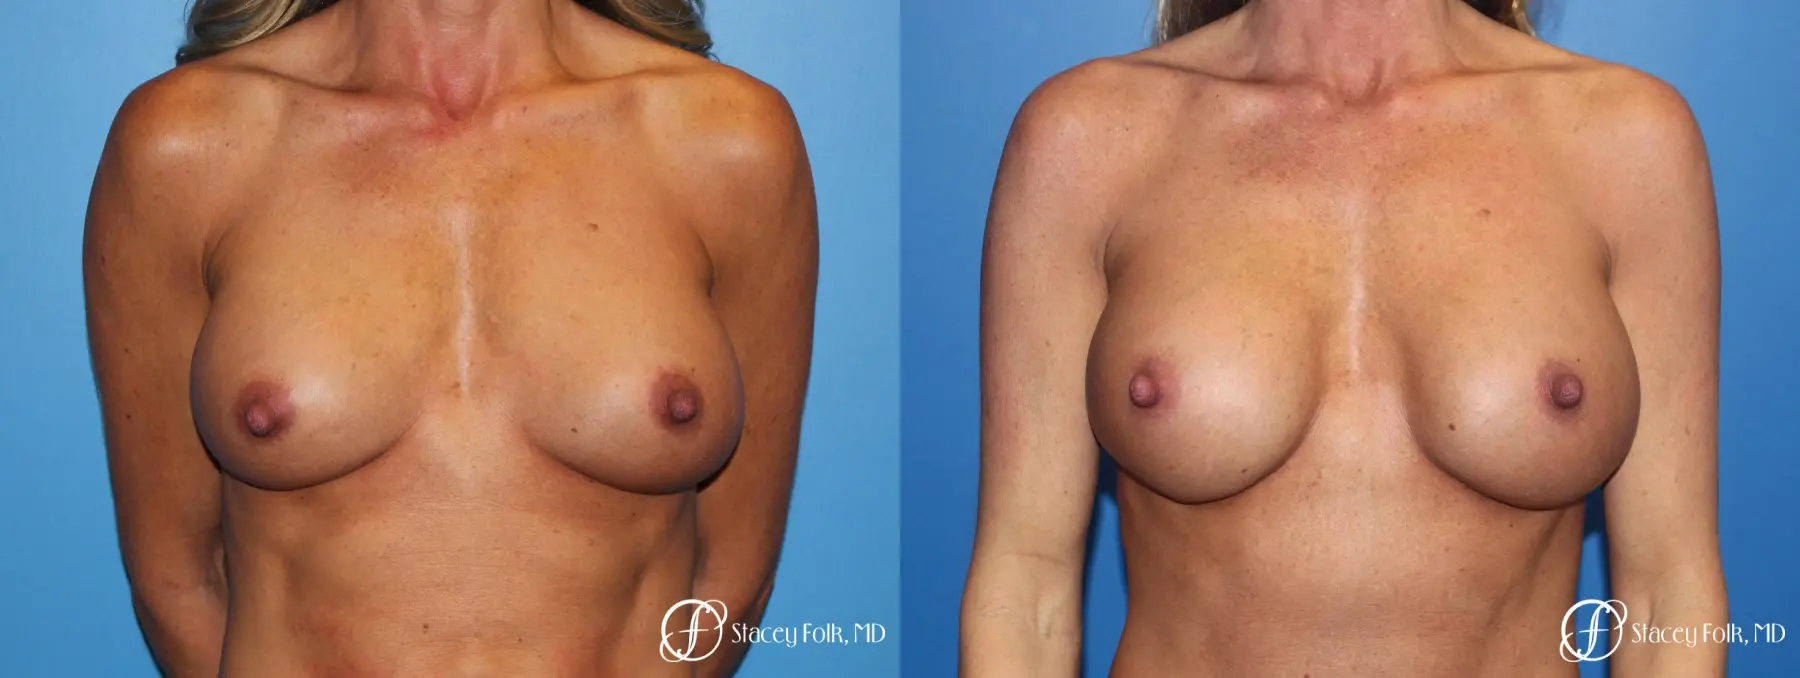 Breast Revision - Before and After